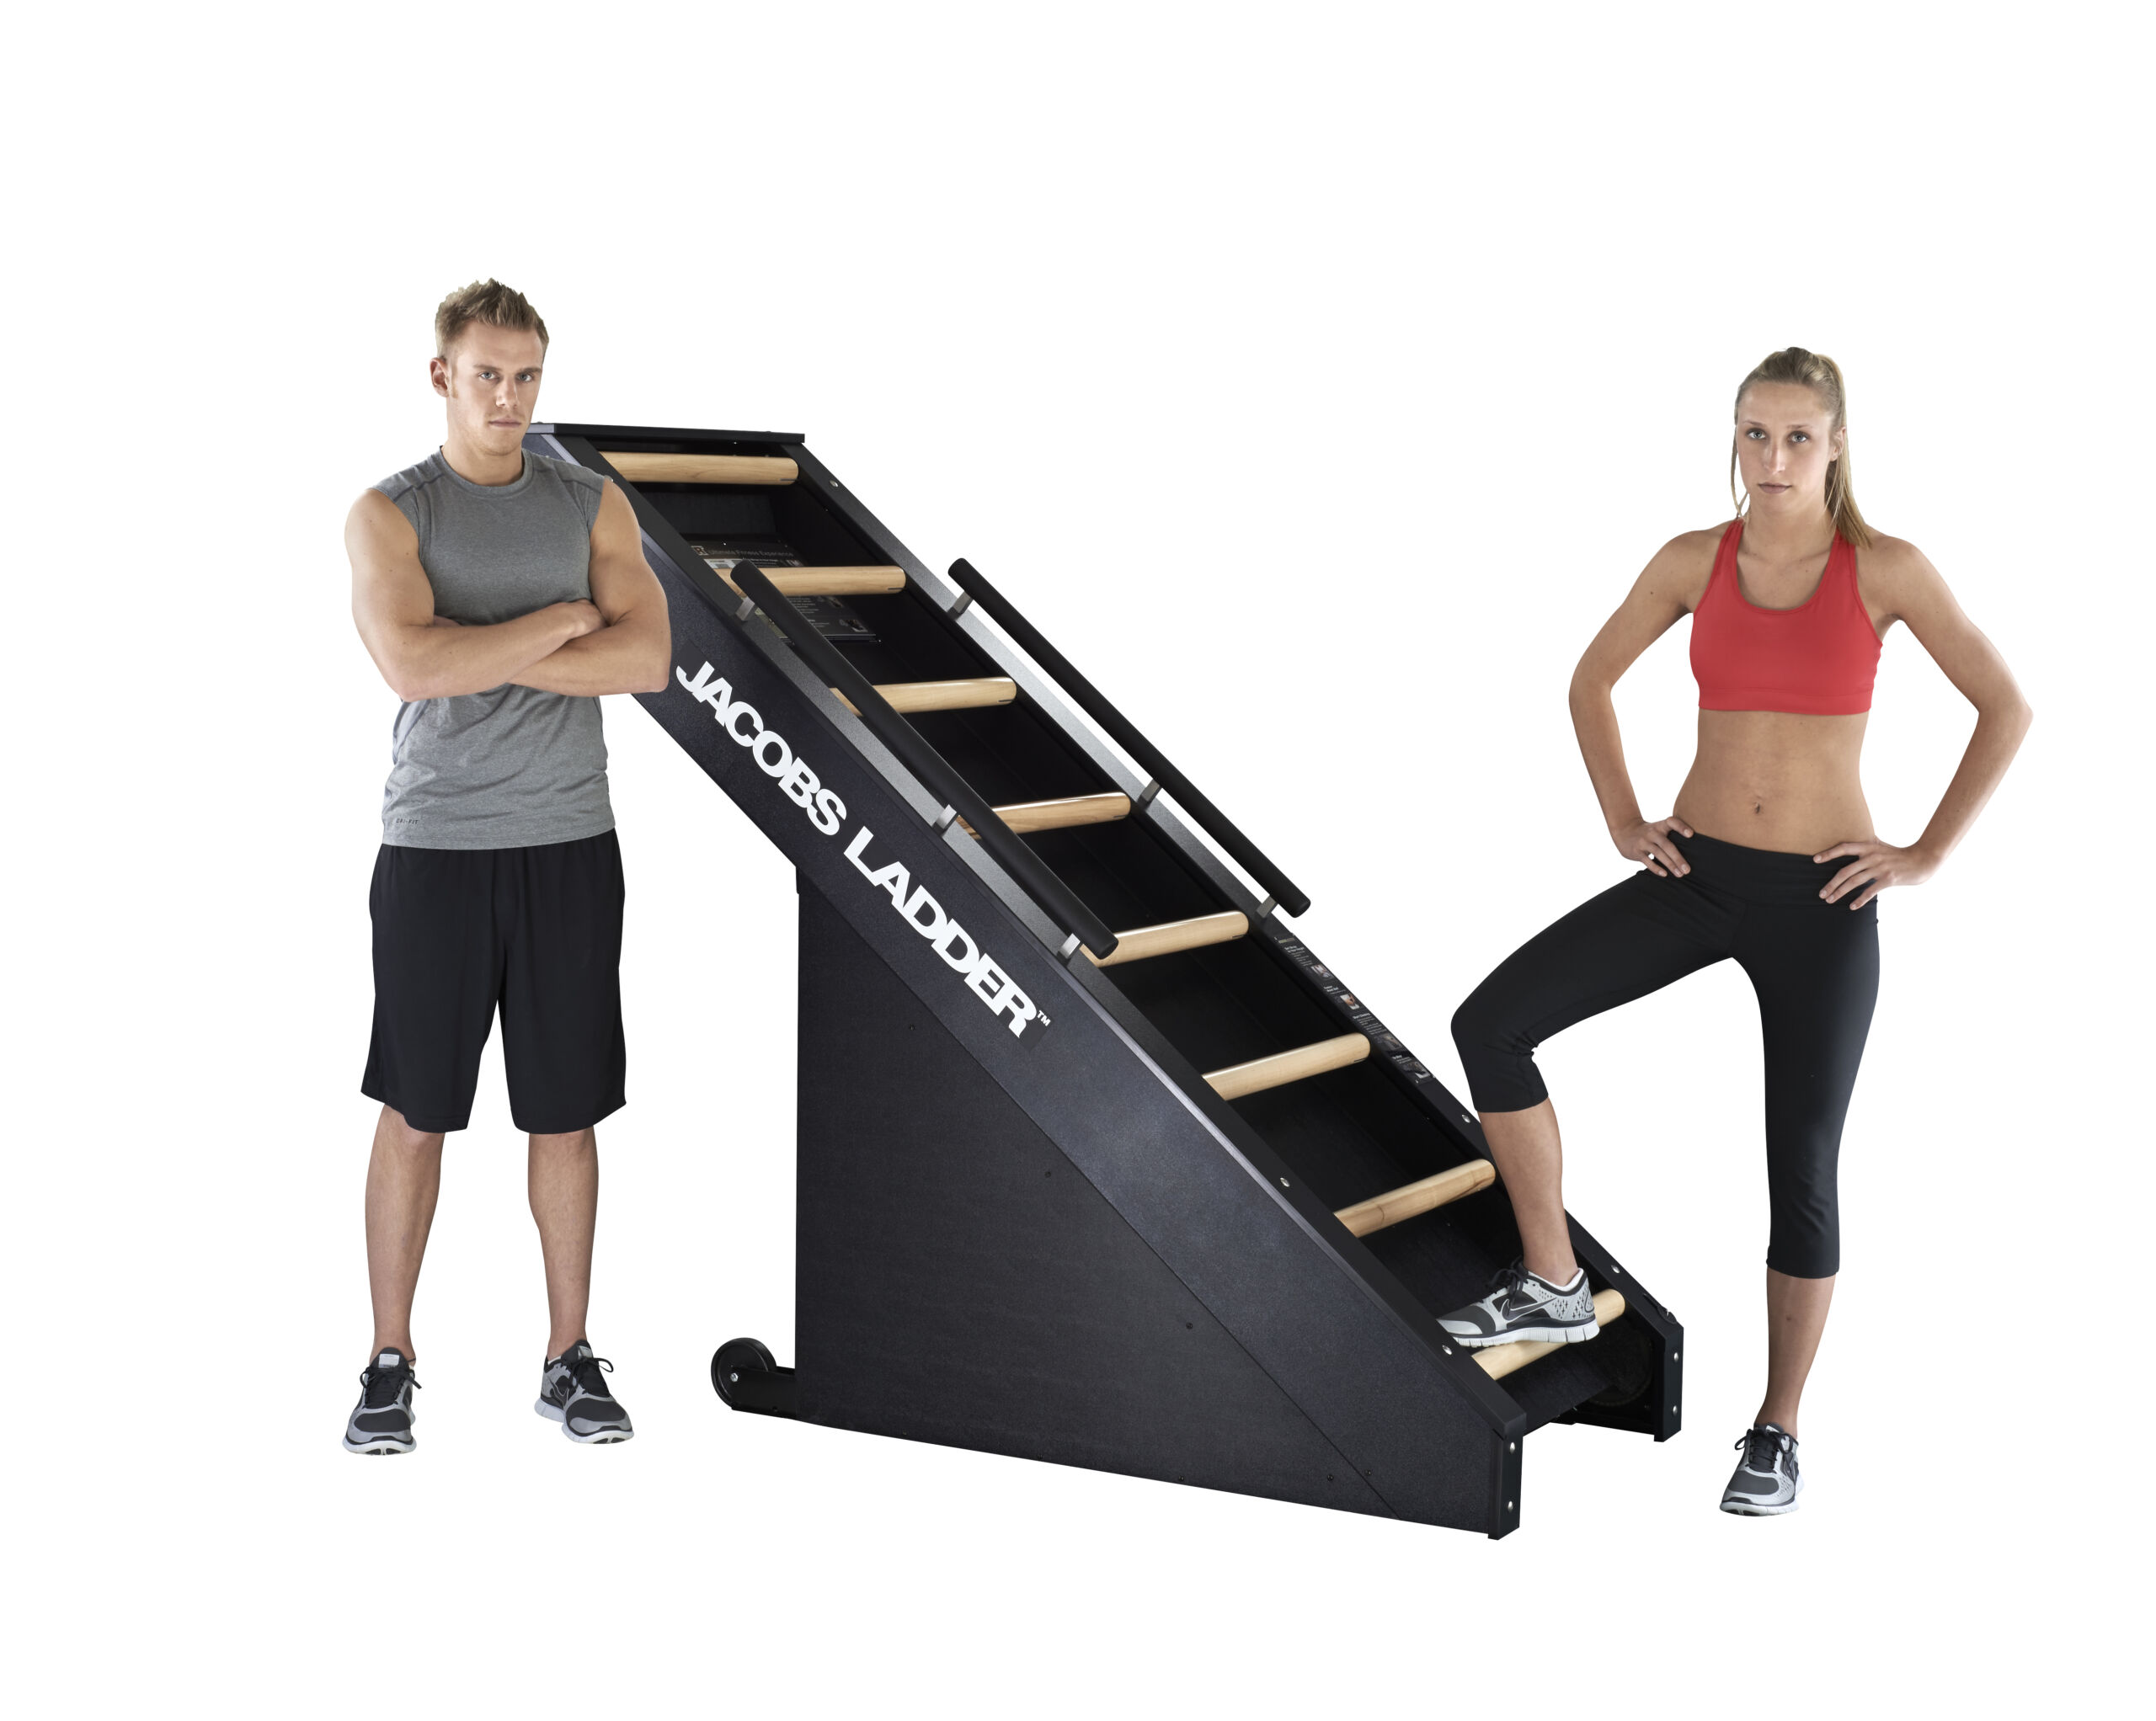 StairMaster Jacobs Ladder JL 3 Product Image